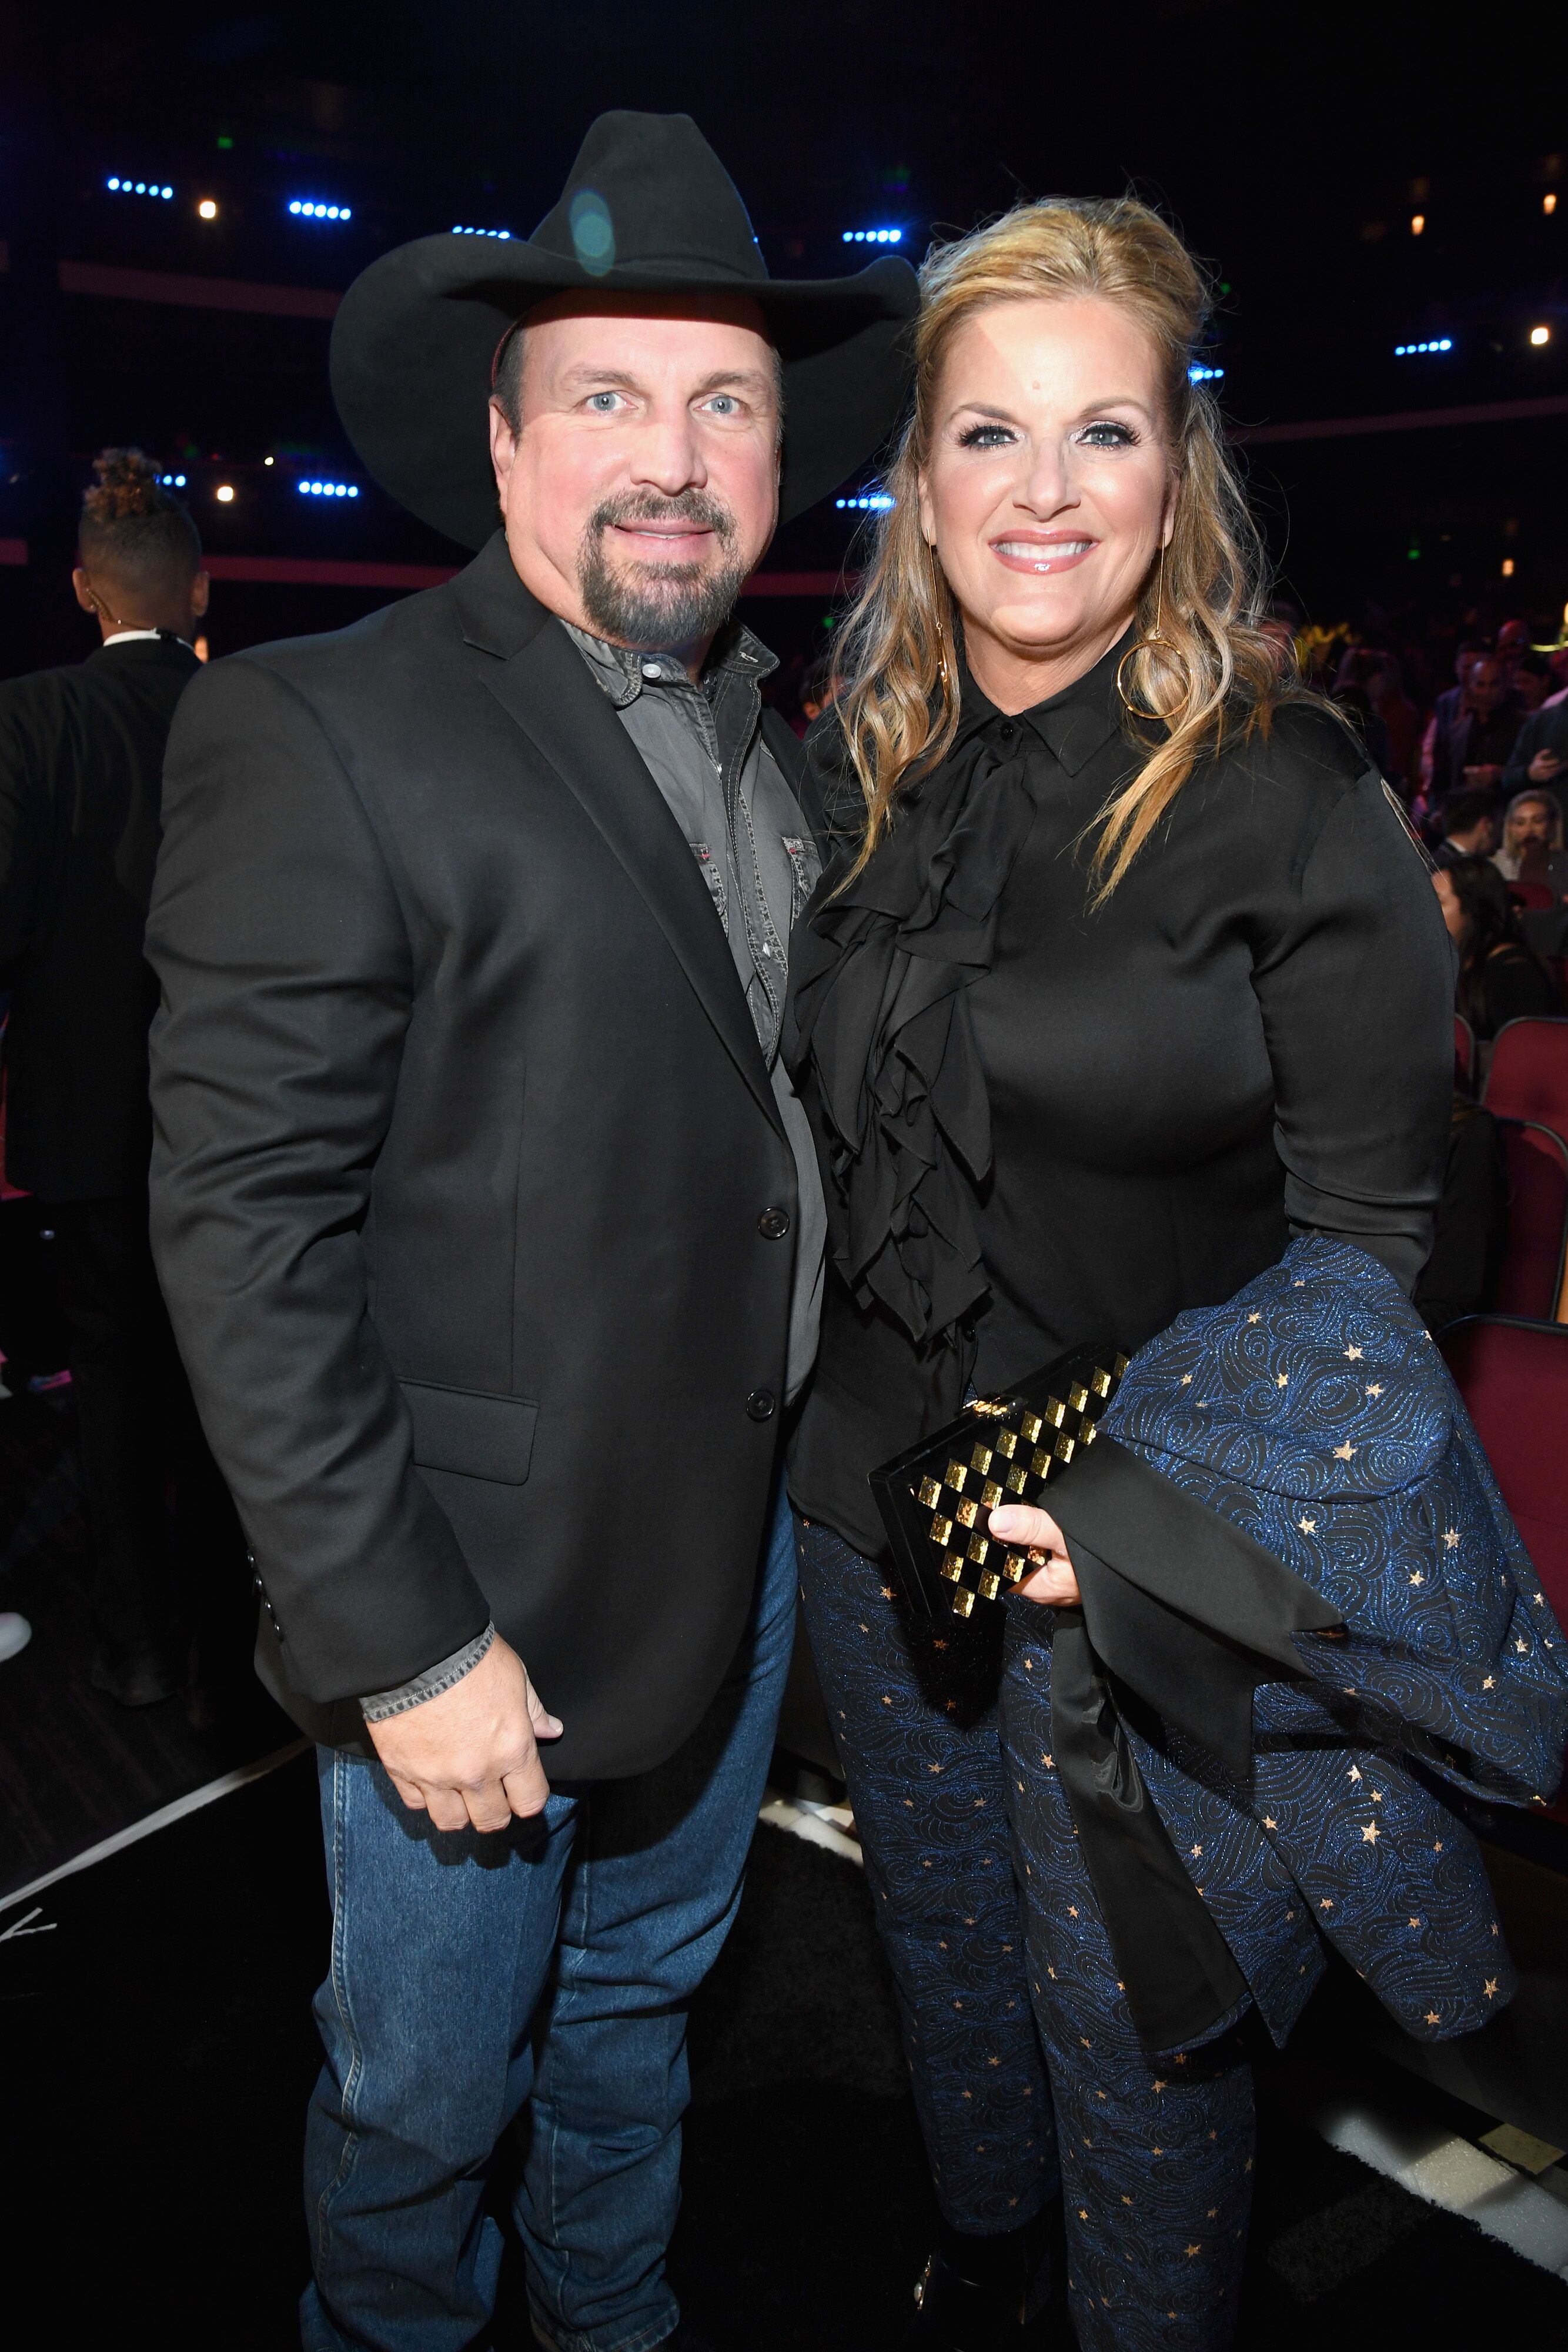 Garth Brooks and Trisha Yearwood attend the 2019 iHeartRadio Music Awards. | Source: Getty Images